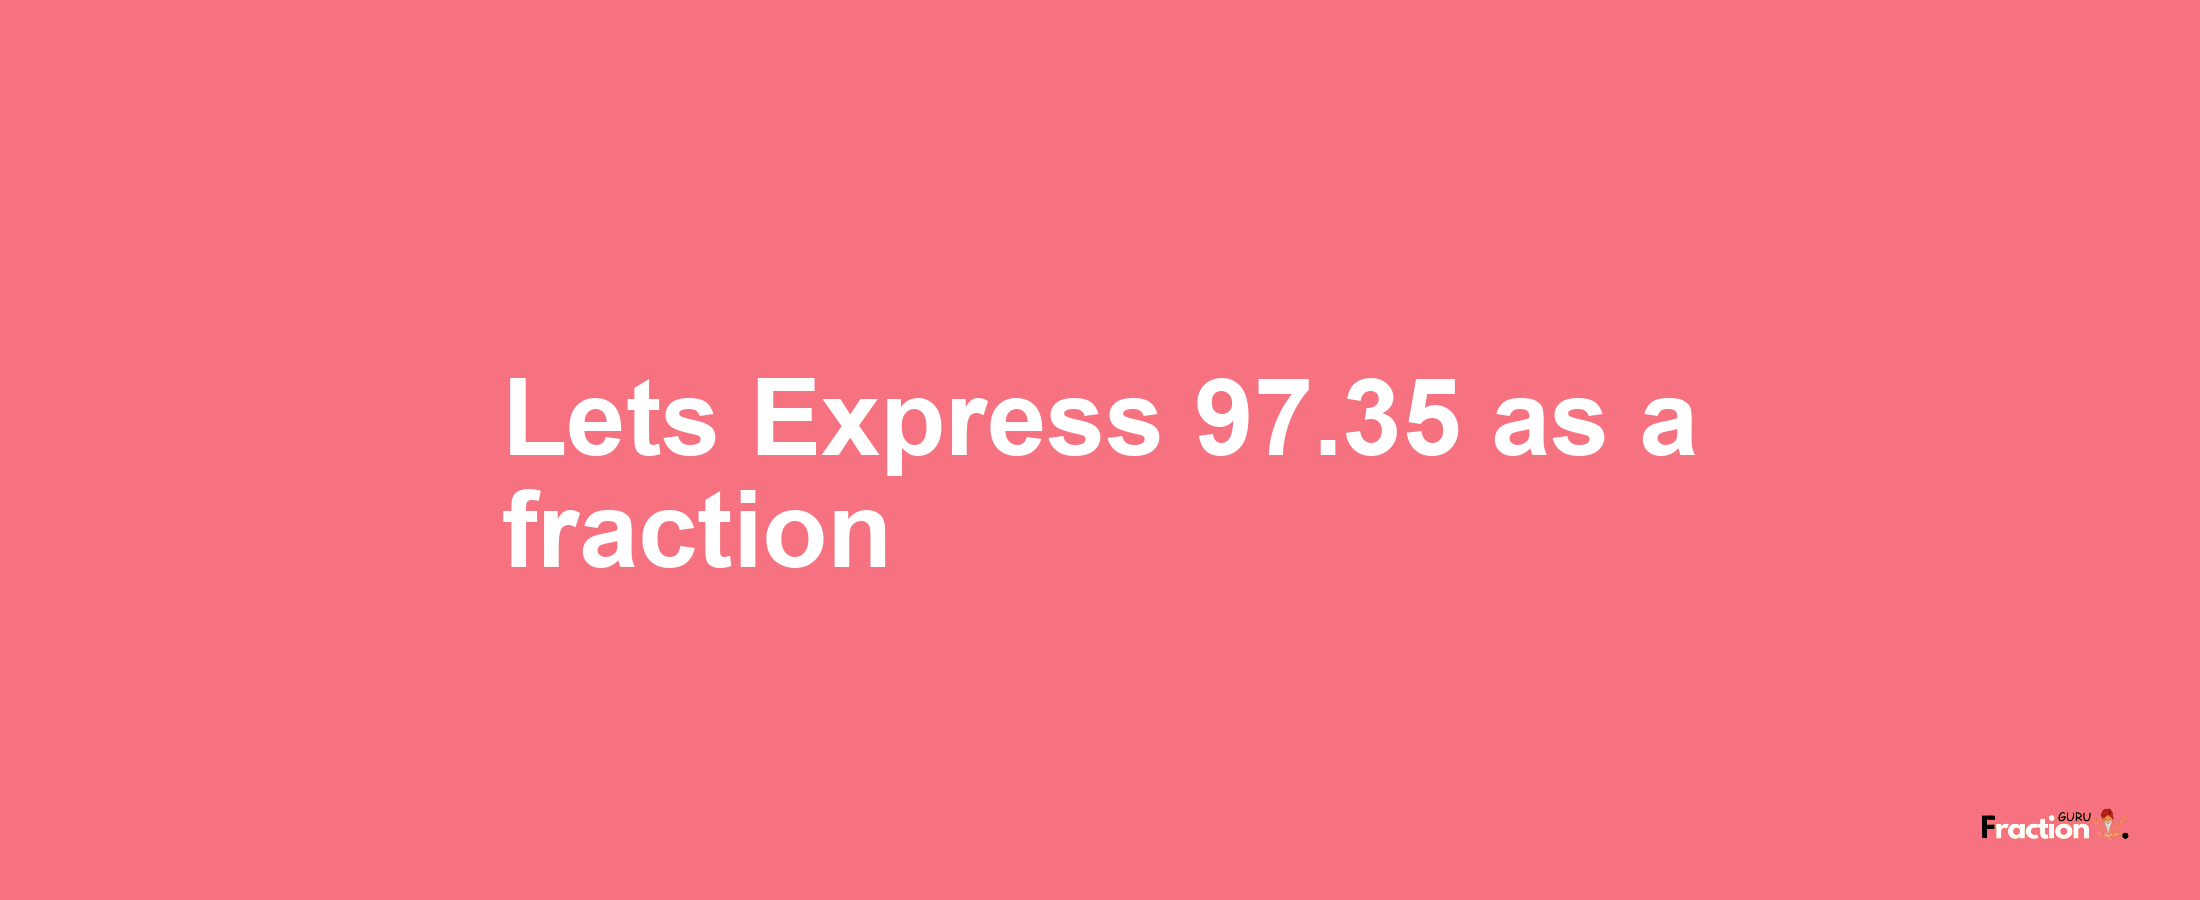 Lets Express 97.35 as afraction